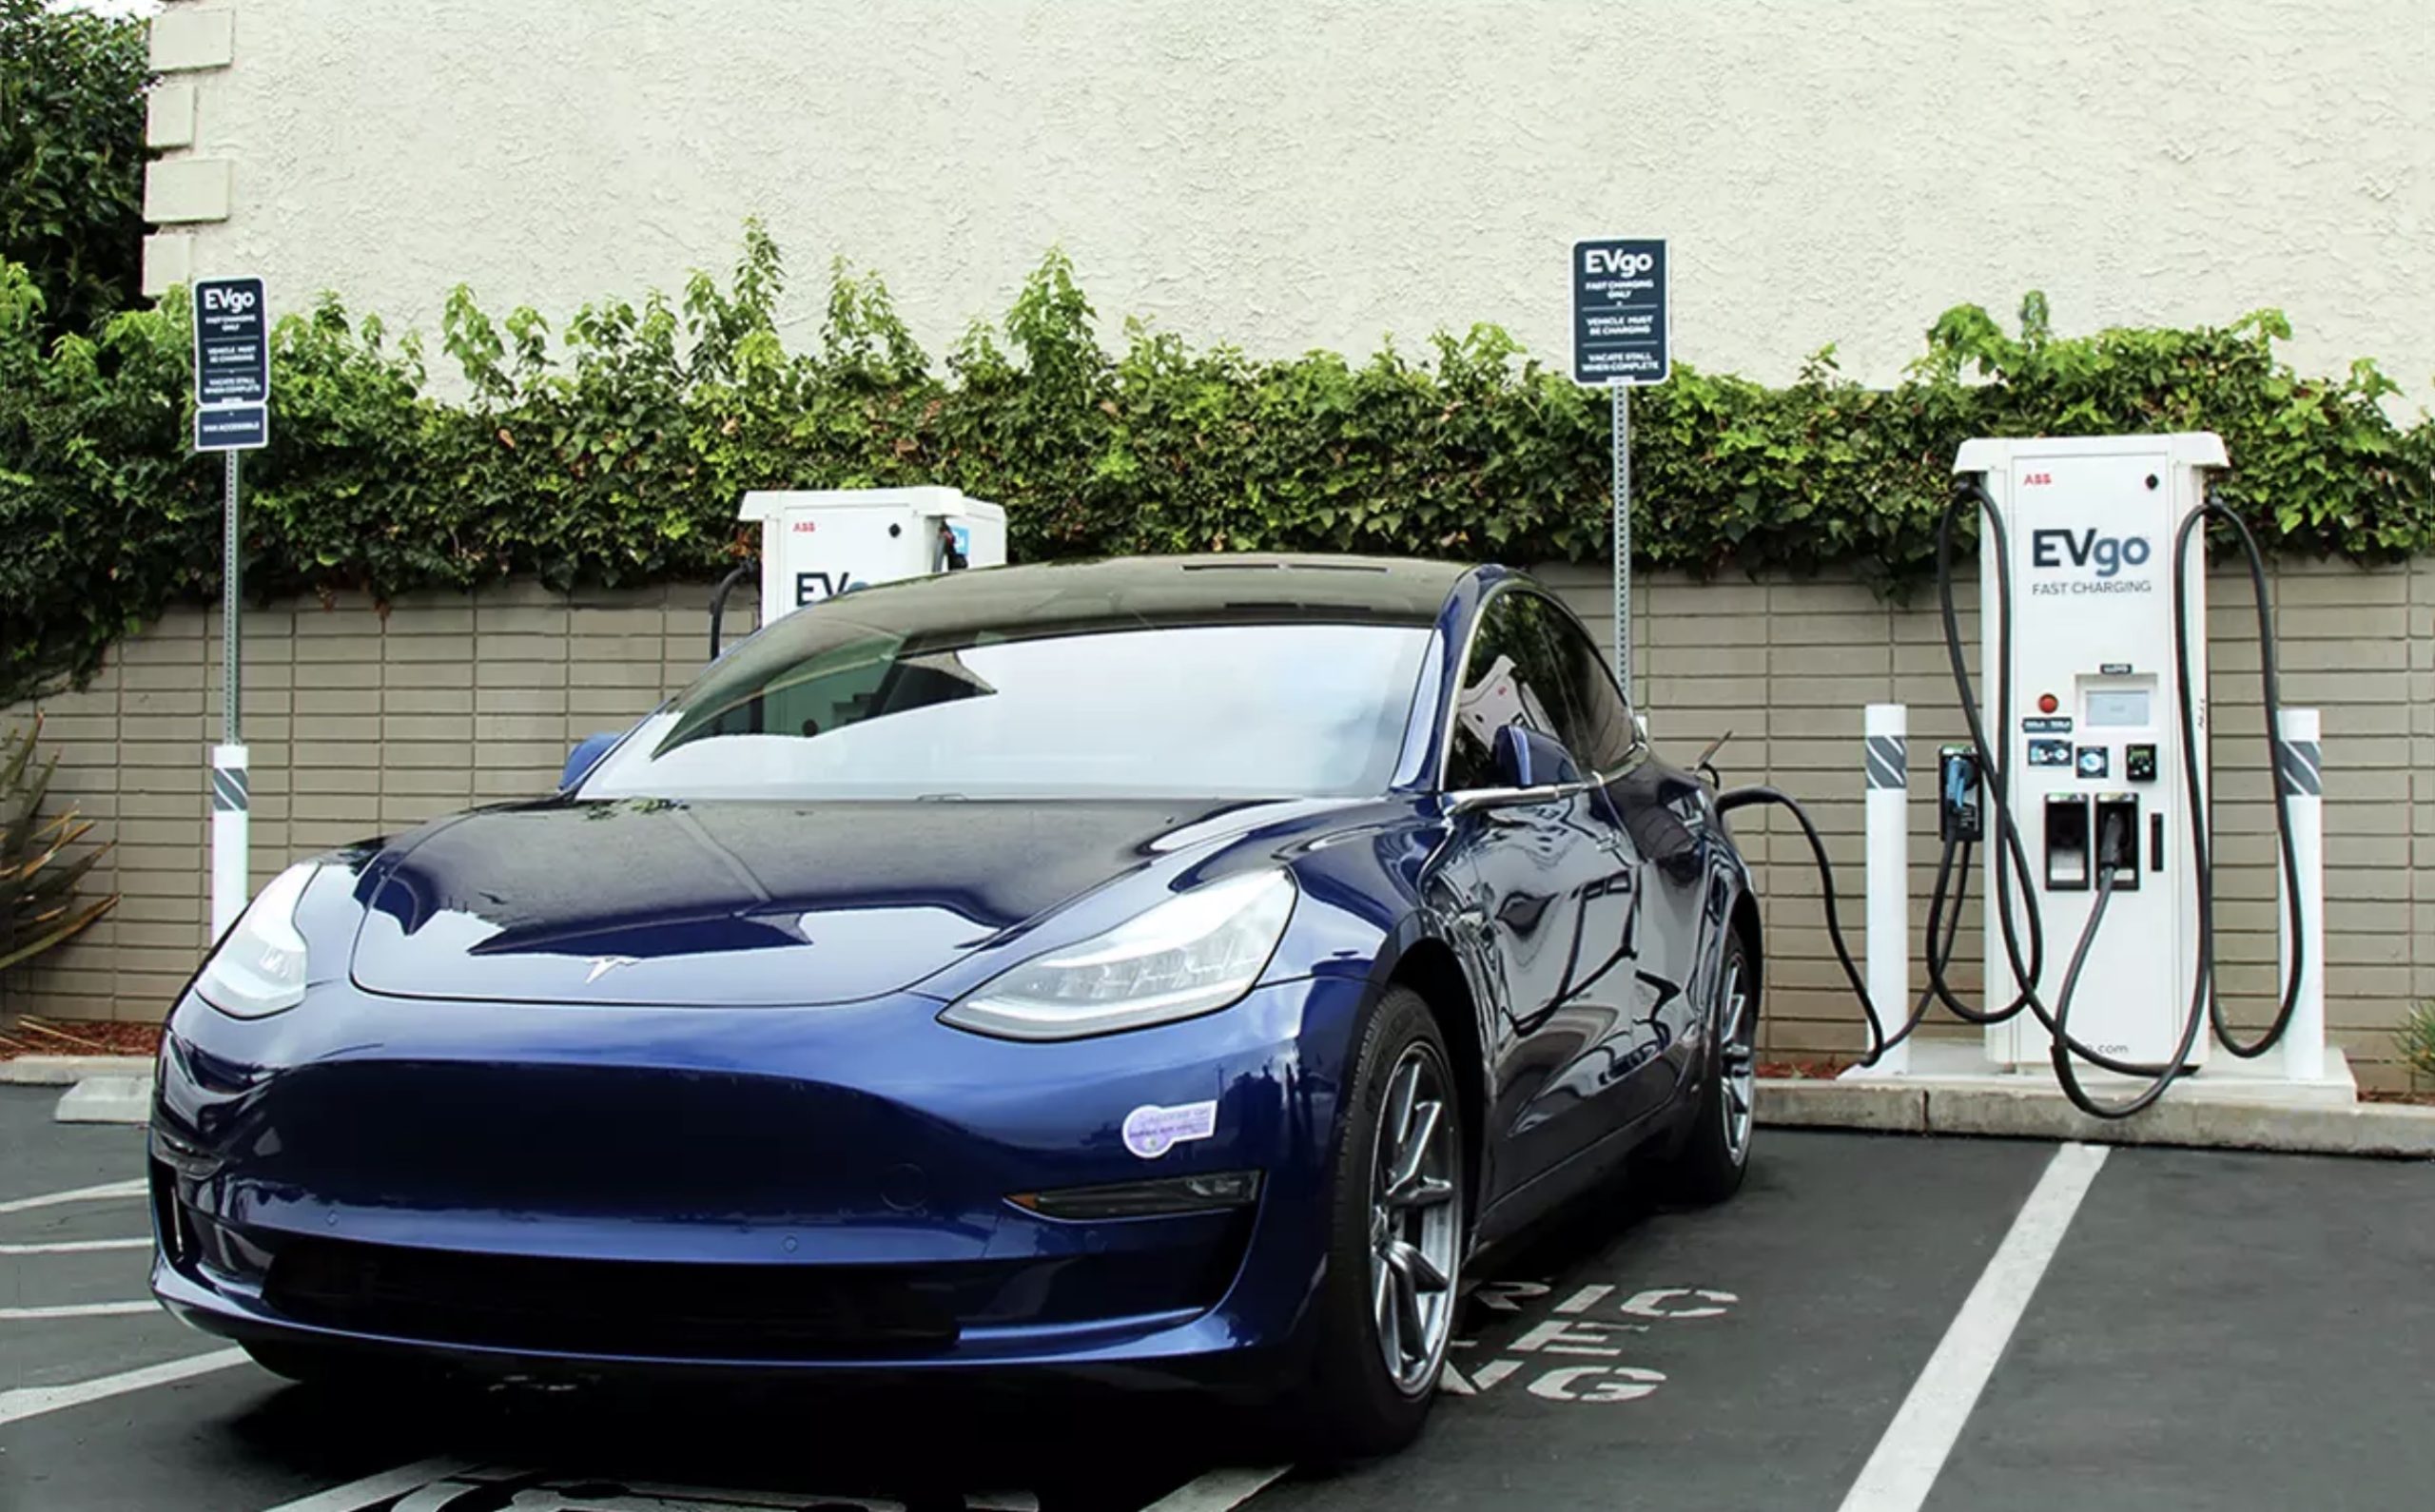 Waze adds electric vehicle charging stations to its map